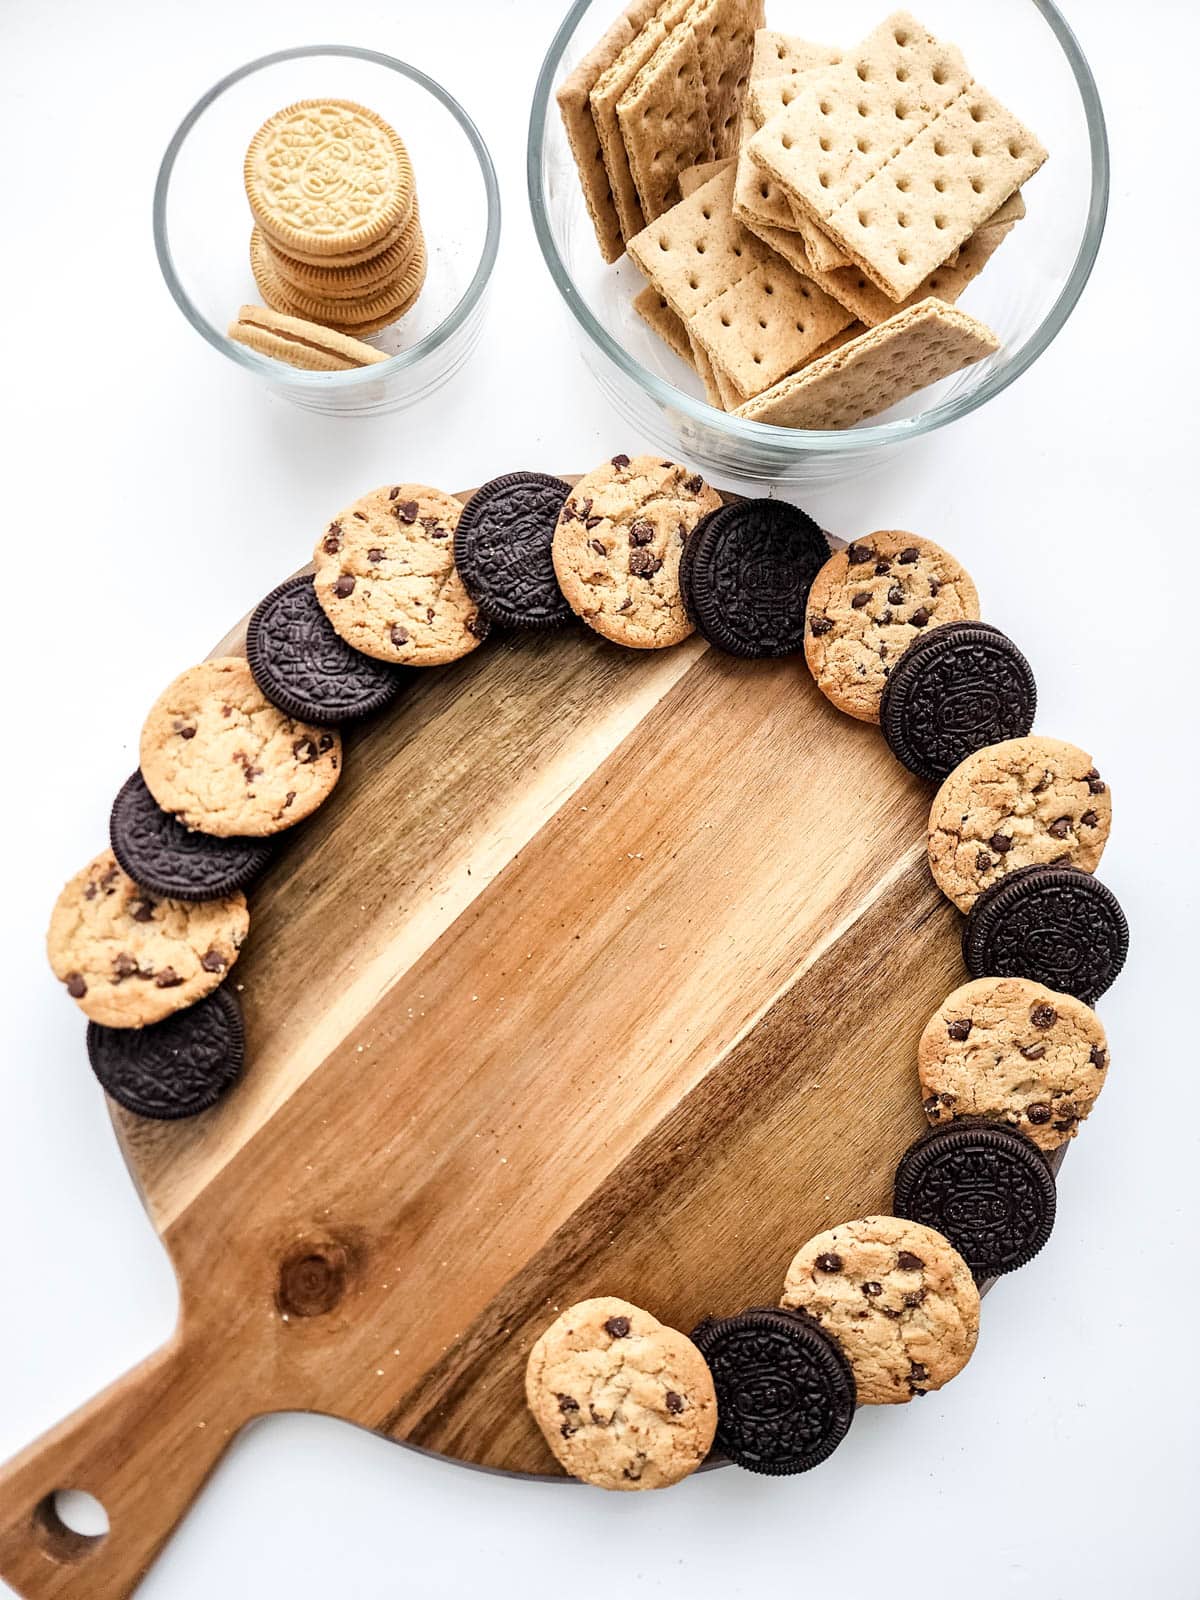 Cookies on cutting board with more snacks in bowls